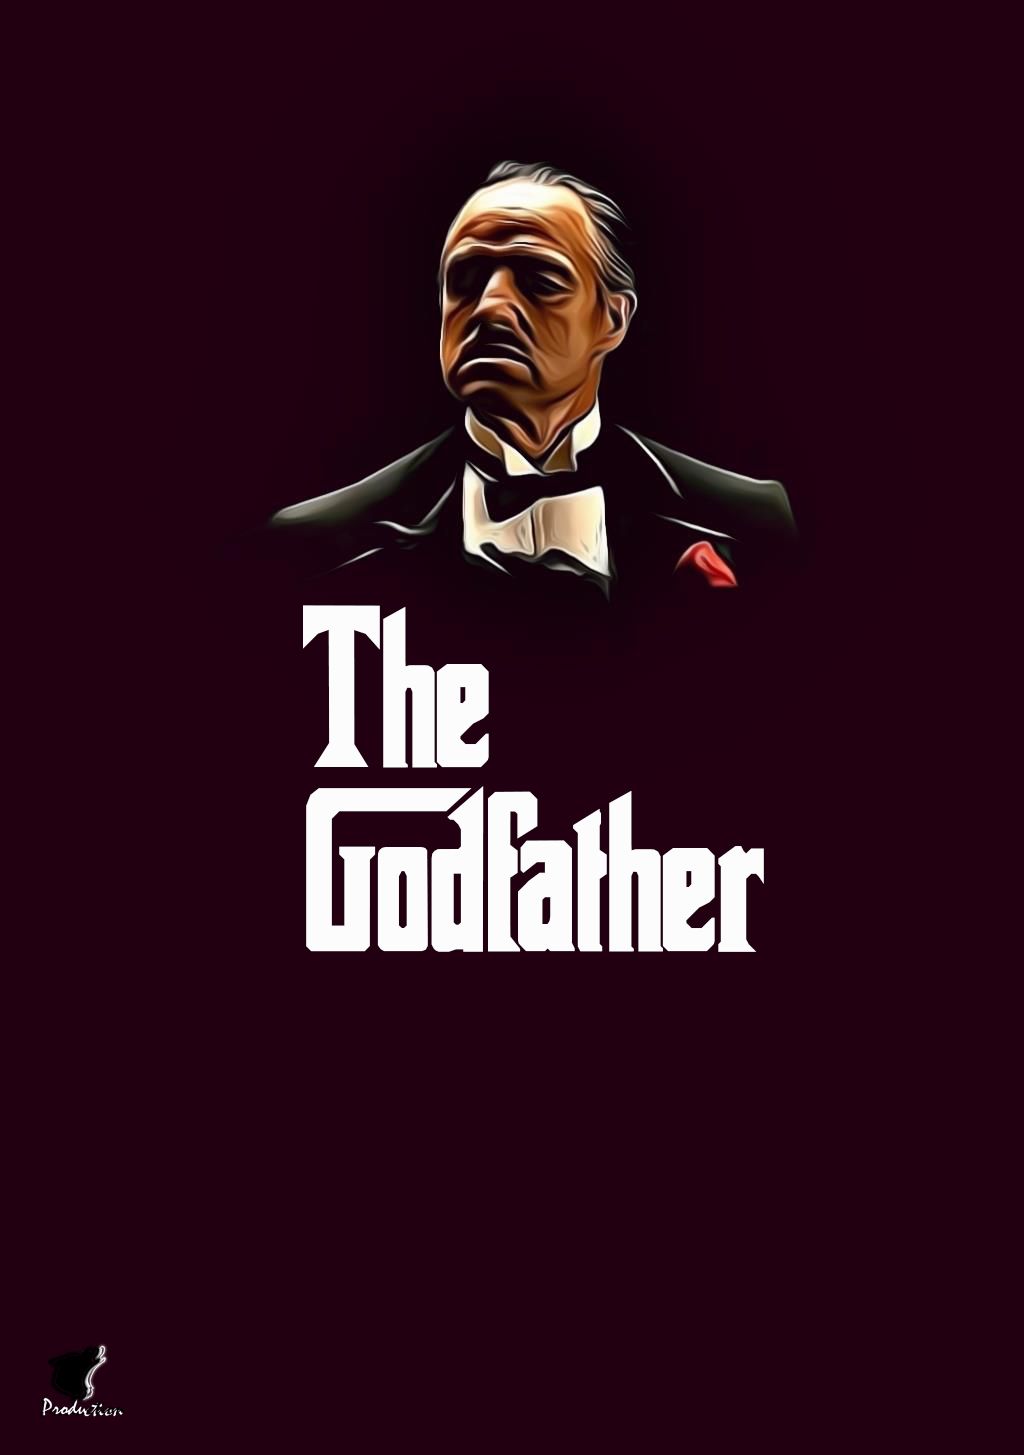 The godfather wallpaper